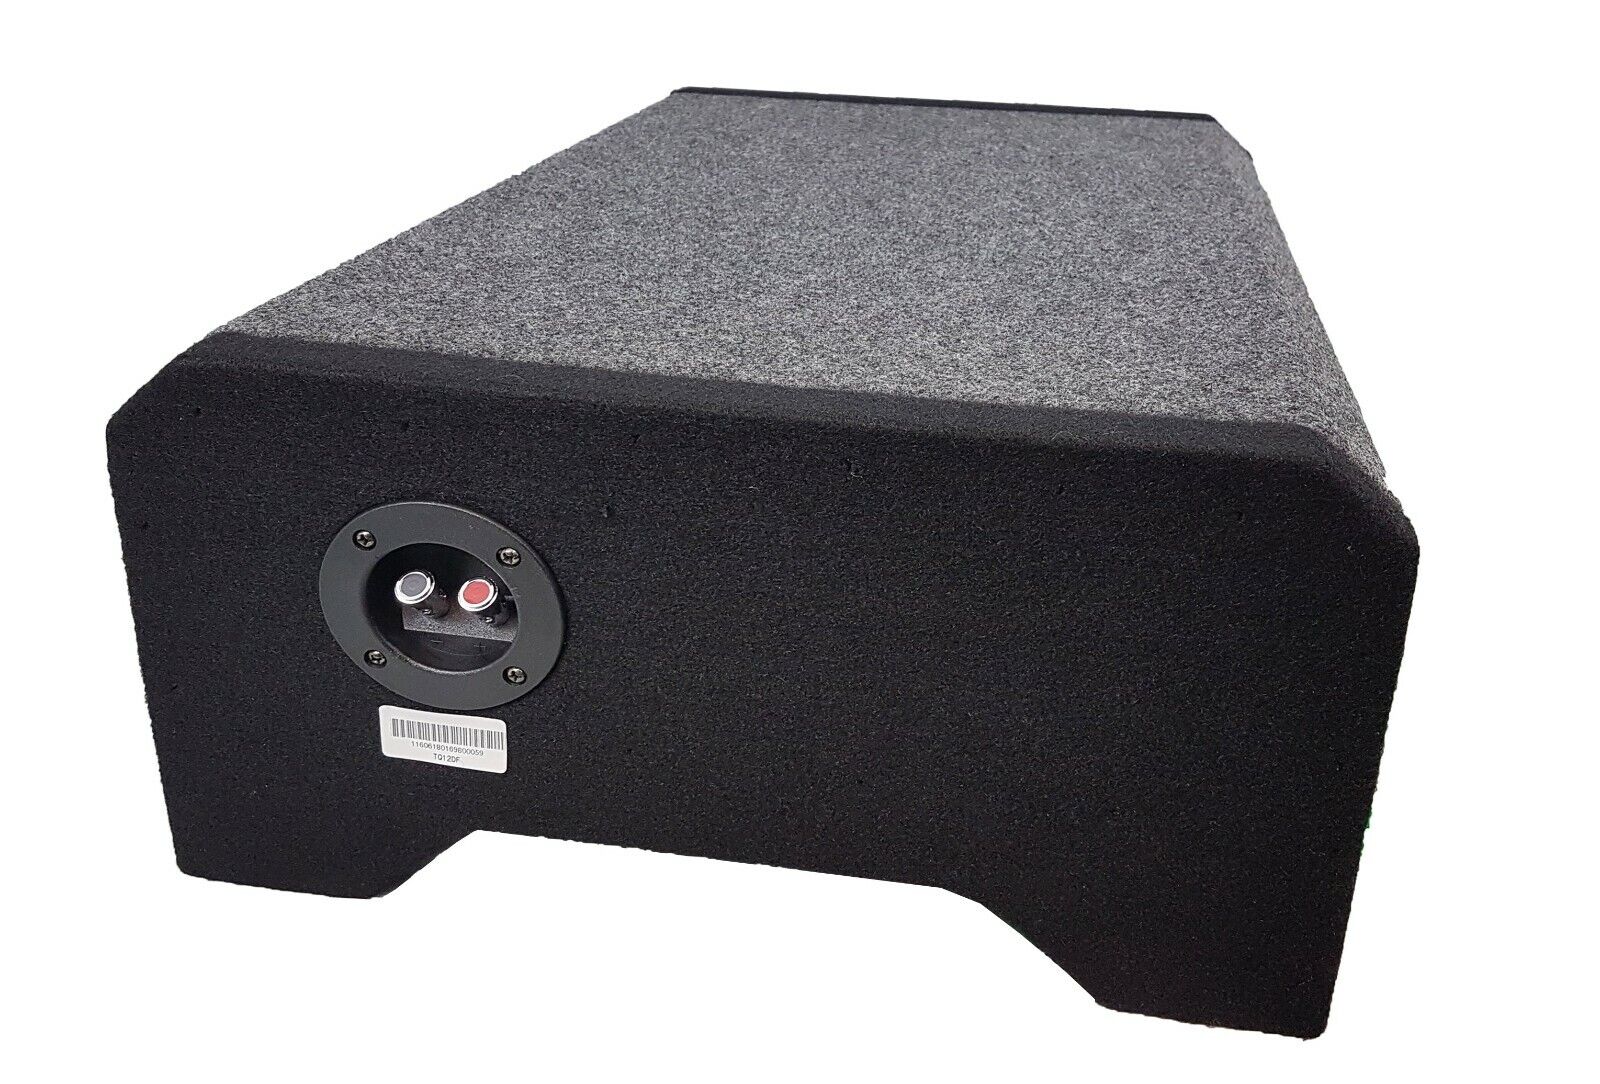 12" Bass Subwoofer Box Car Audio 1500 Watts PASSIVE BOX New first time in UK